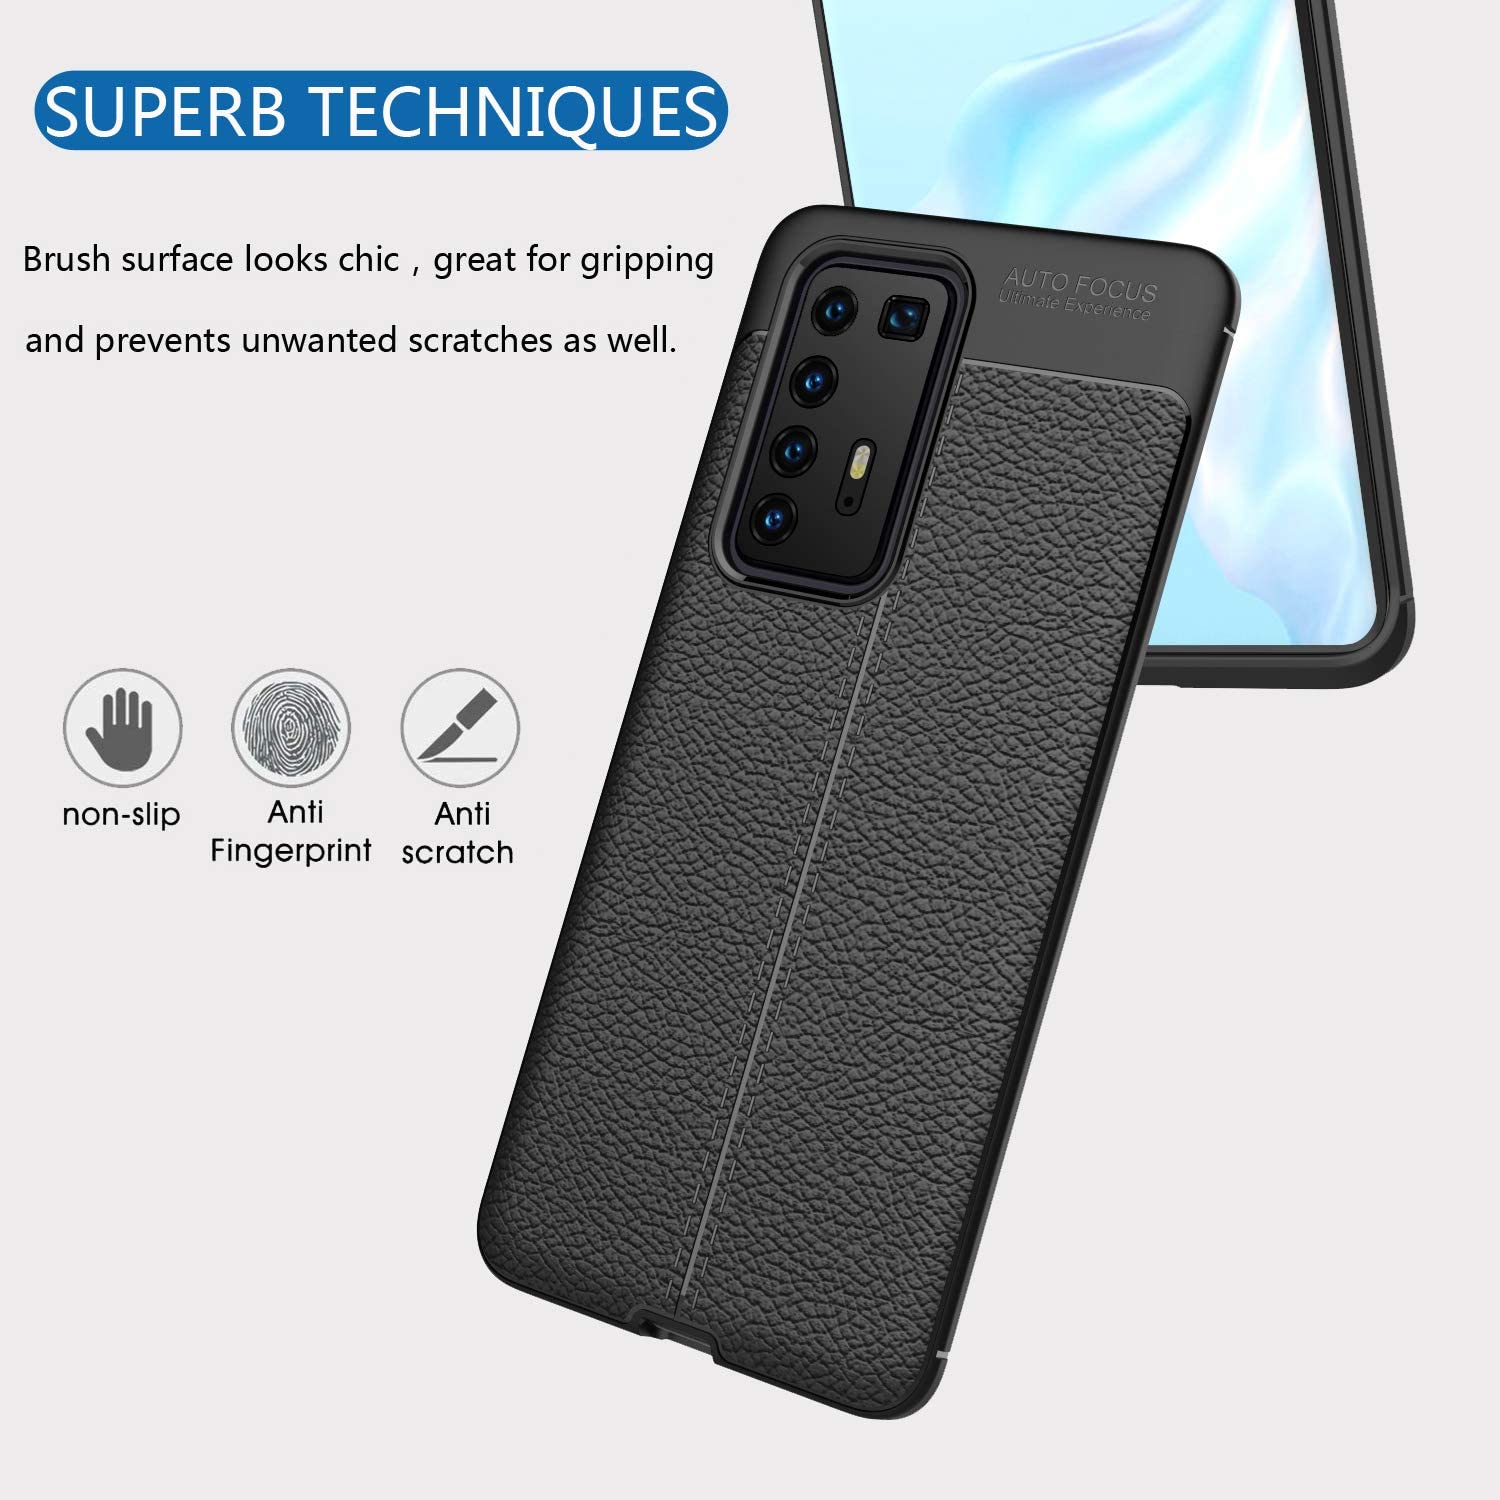 Leather Texture design Bumper Protective Cover for Huawei Mate 20